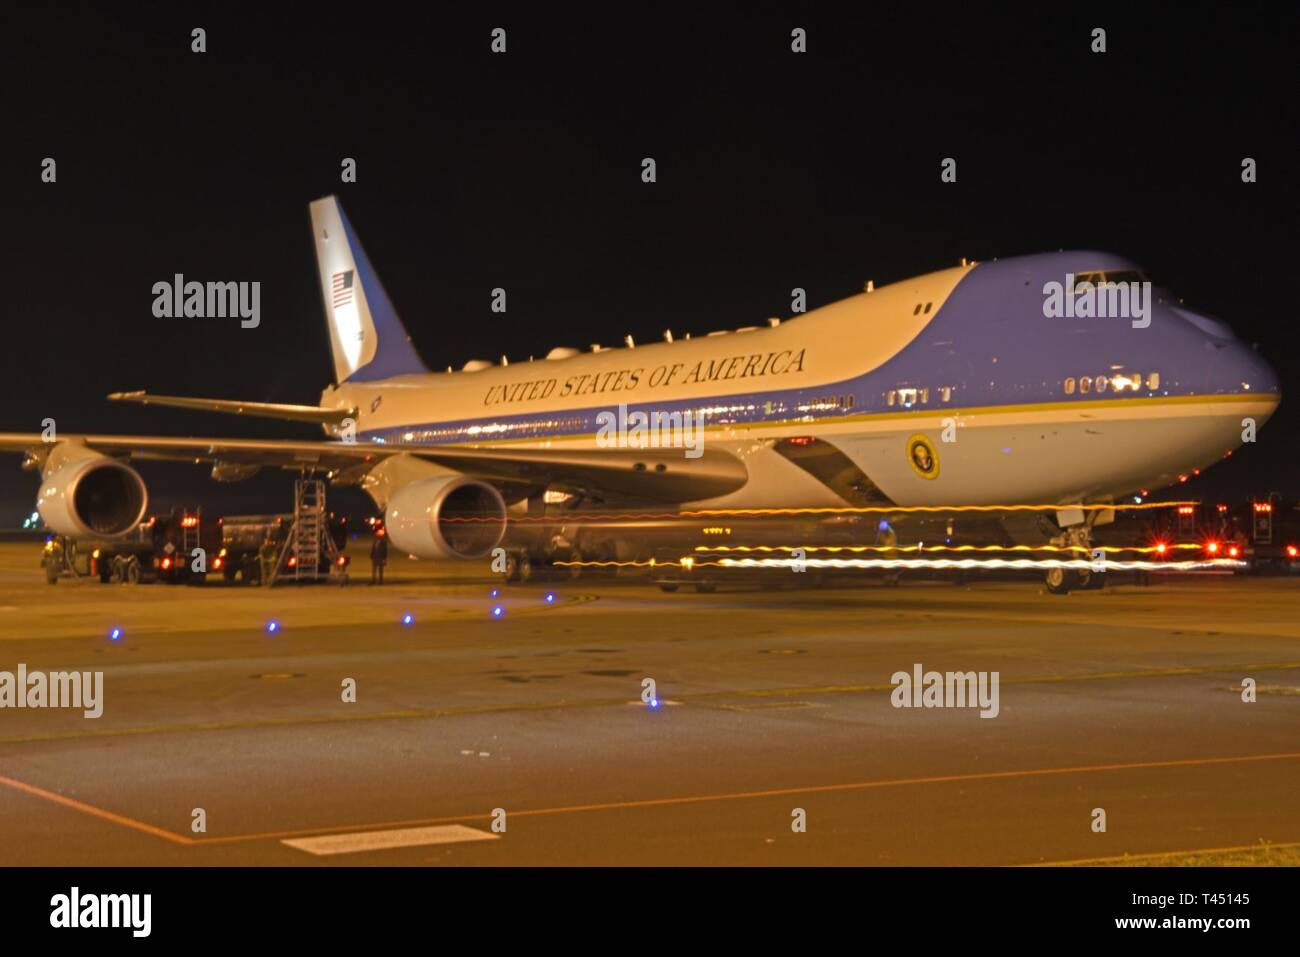 Air Force One receives fuel during a stop at RAF Mildenhall, England, Feb. 26, 2019. Air Force One, carrying President Donald J. Trump and a contingency of White House officials and media members, received fuel and logistical support before continuing on the journey to Hanoi, the capital city of Vietnam, for the president’s second summit North Korean leader Kim-Jong Un. Stock Photo